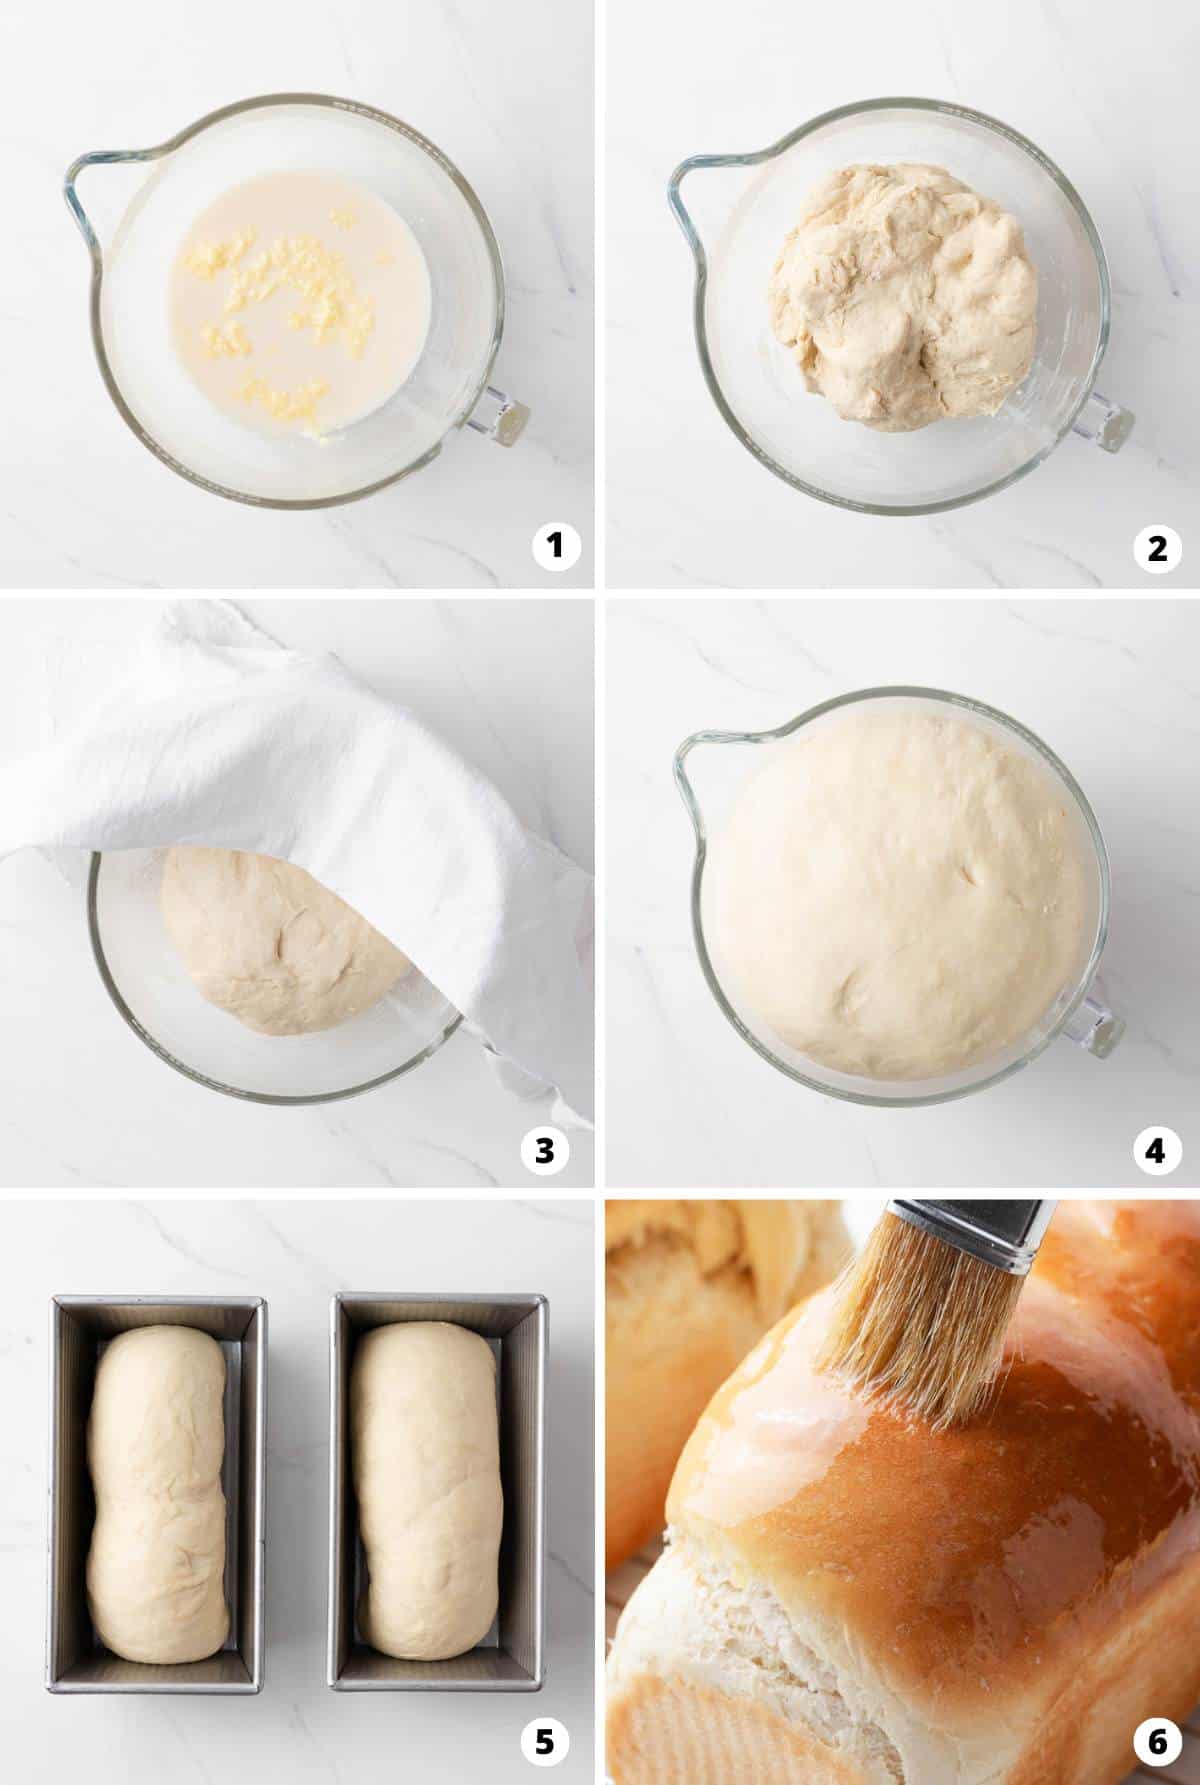 Showing how to make homemade bread in a 6 step collage.